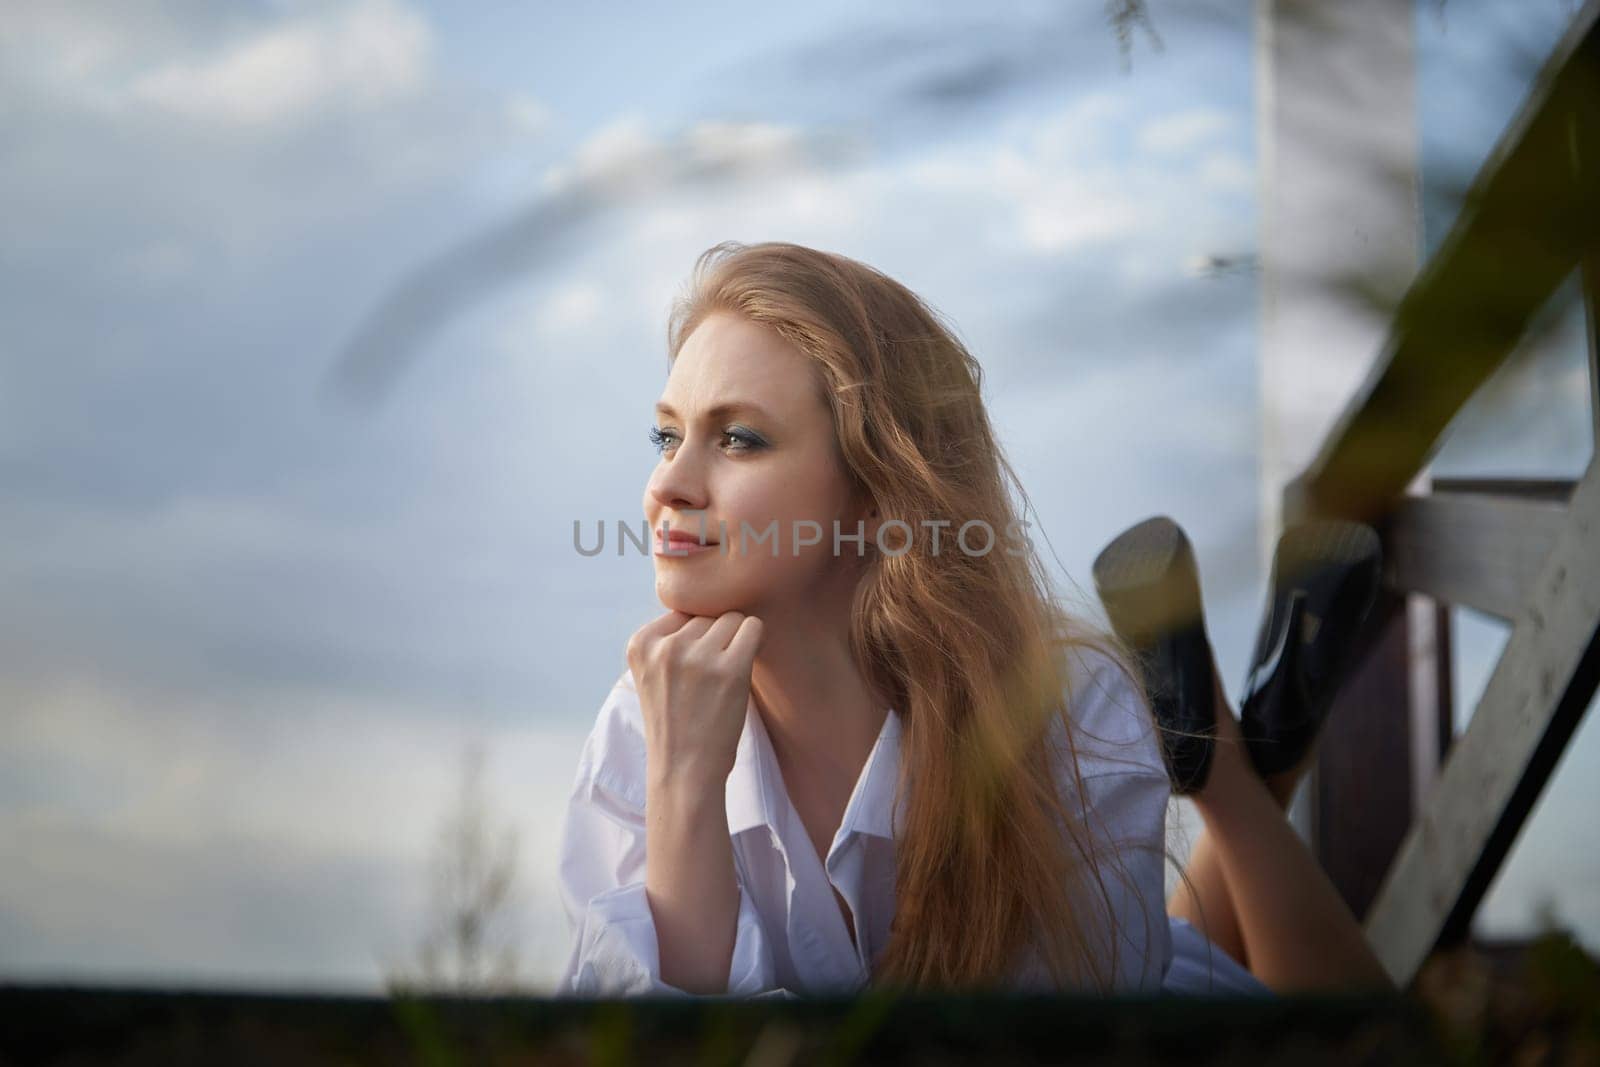 Beautiful girl with long hair in white shirt in open wooden pavillion in a village or small town. Young slender woman and sky with clouds on background on an autumn, spring or summer day